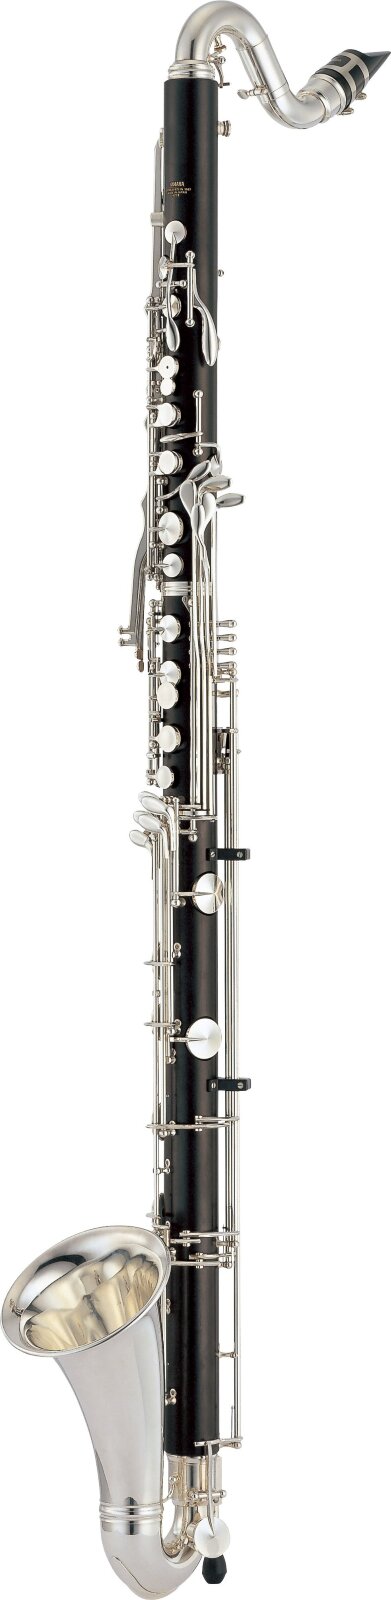 Yamaha YCL-622II Bass clarinet descending to low C : photo 1